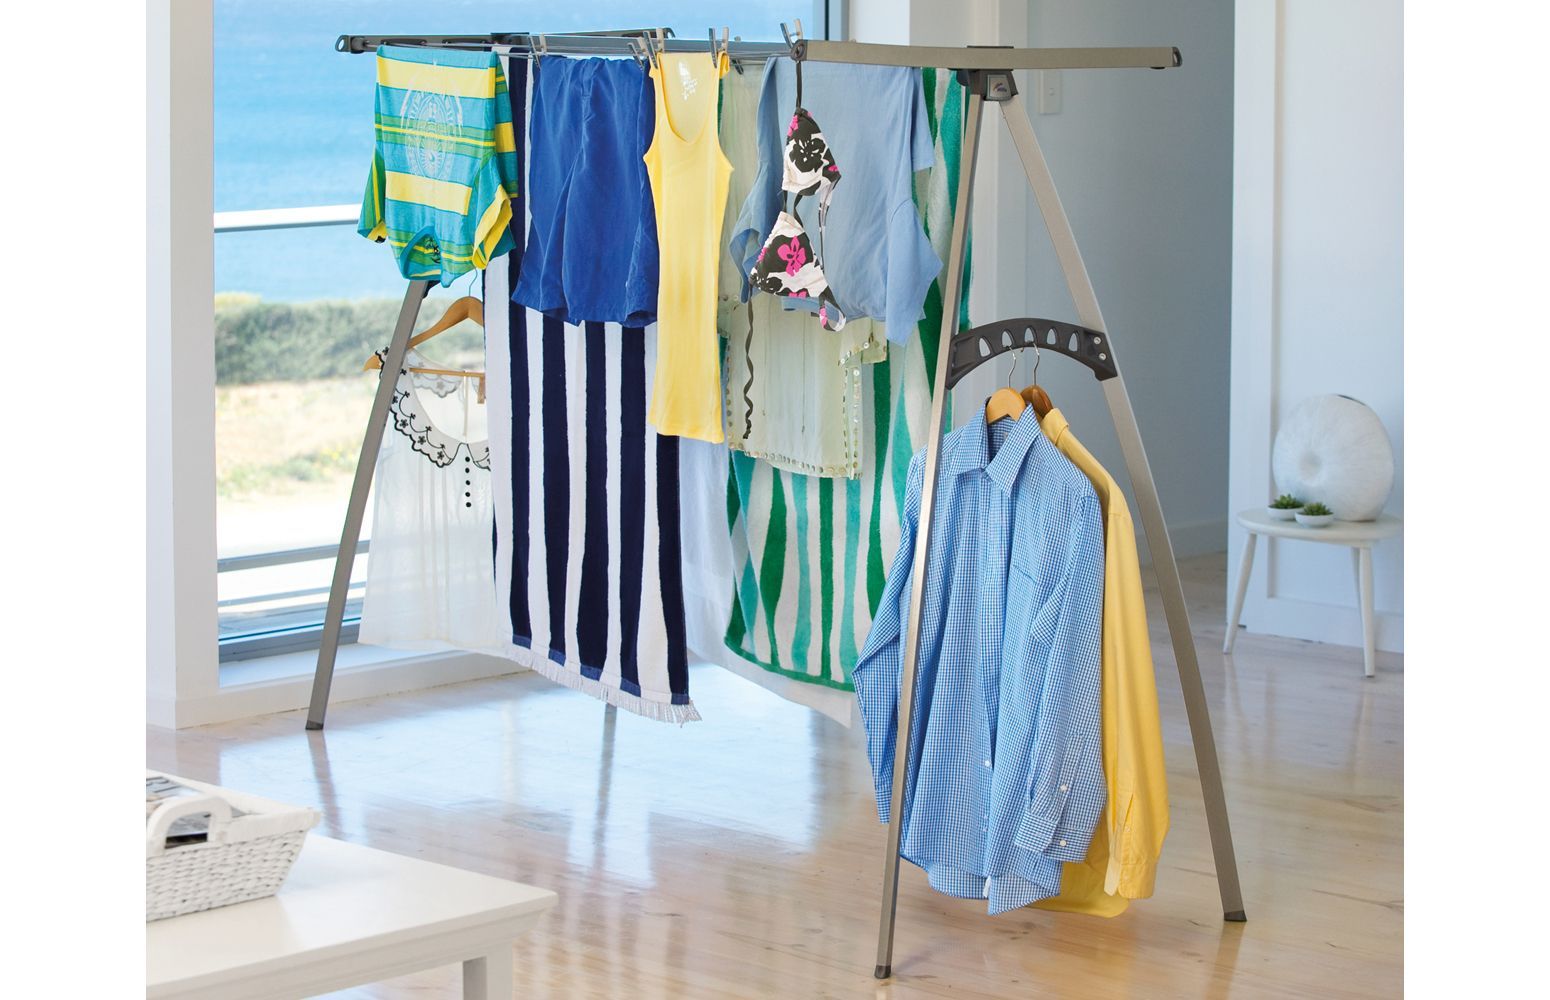 An indoor room with clothes hanging on a portable clothes line.